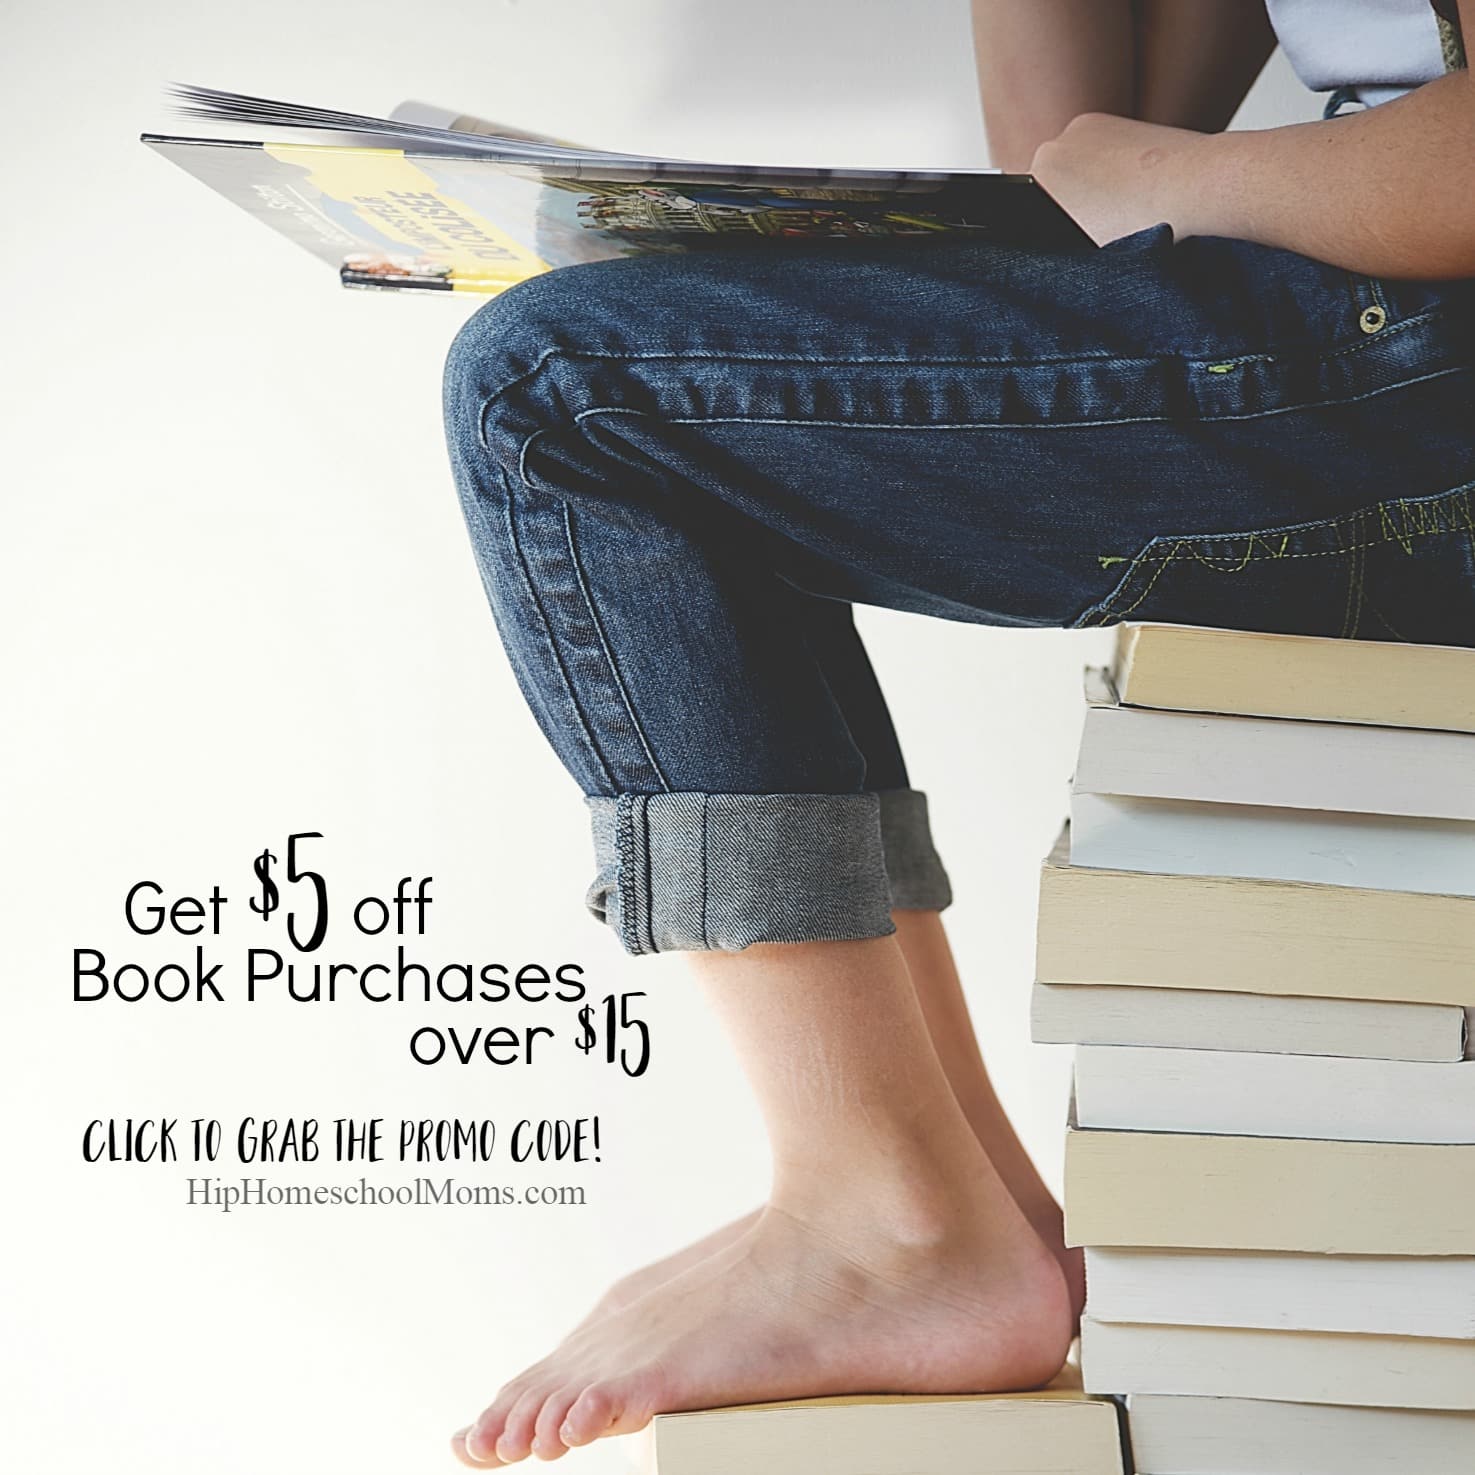 DEAL ALERT: $5 off Book Purchases over $15!